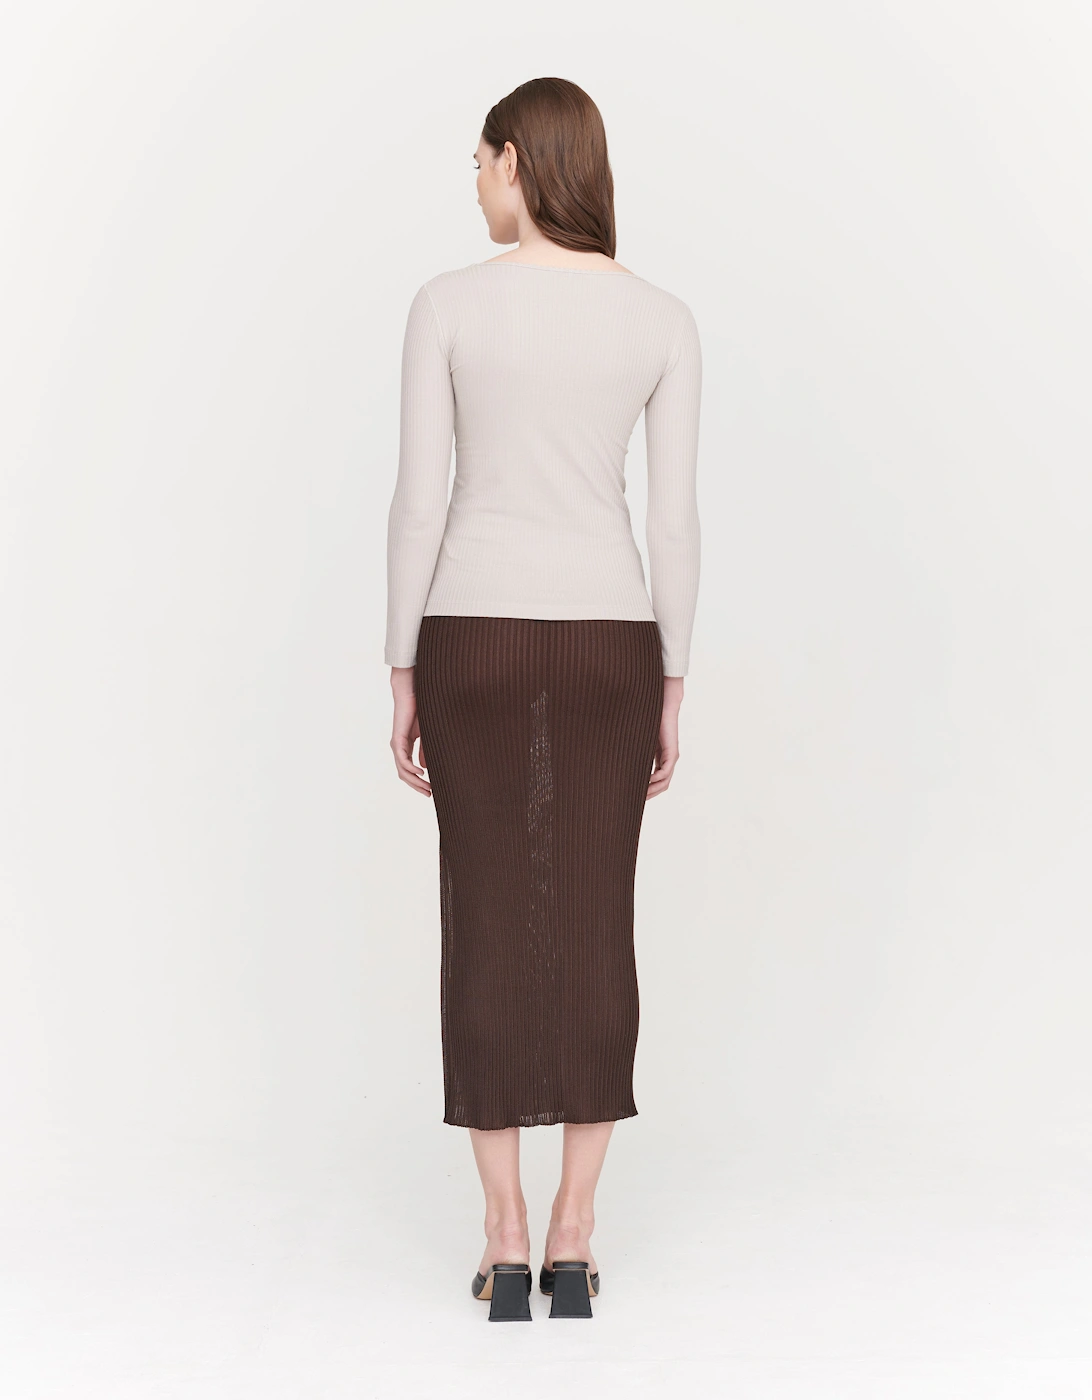 Amelia SeaCell™ Rib Scoop Neck in Taupe